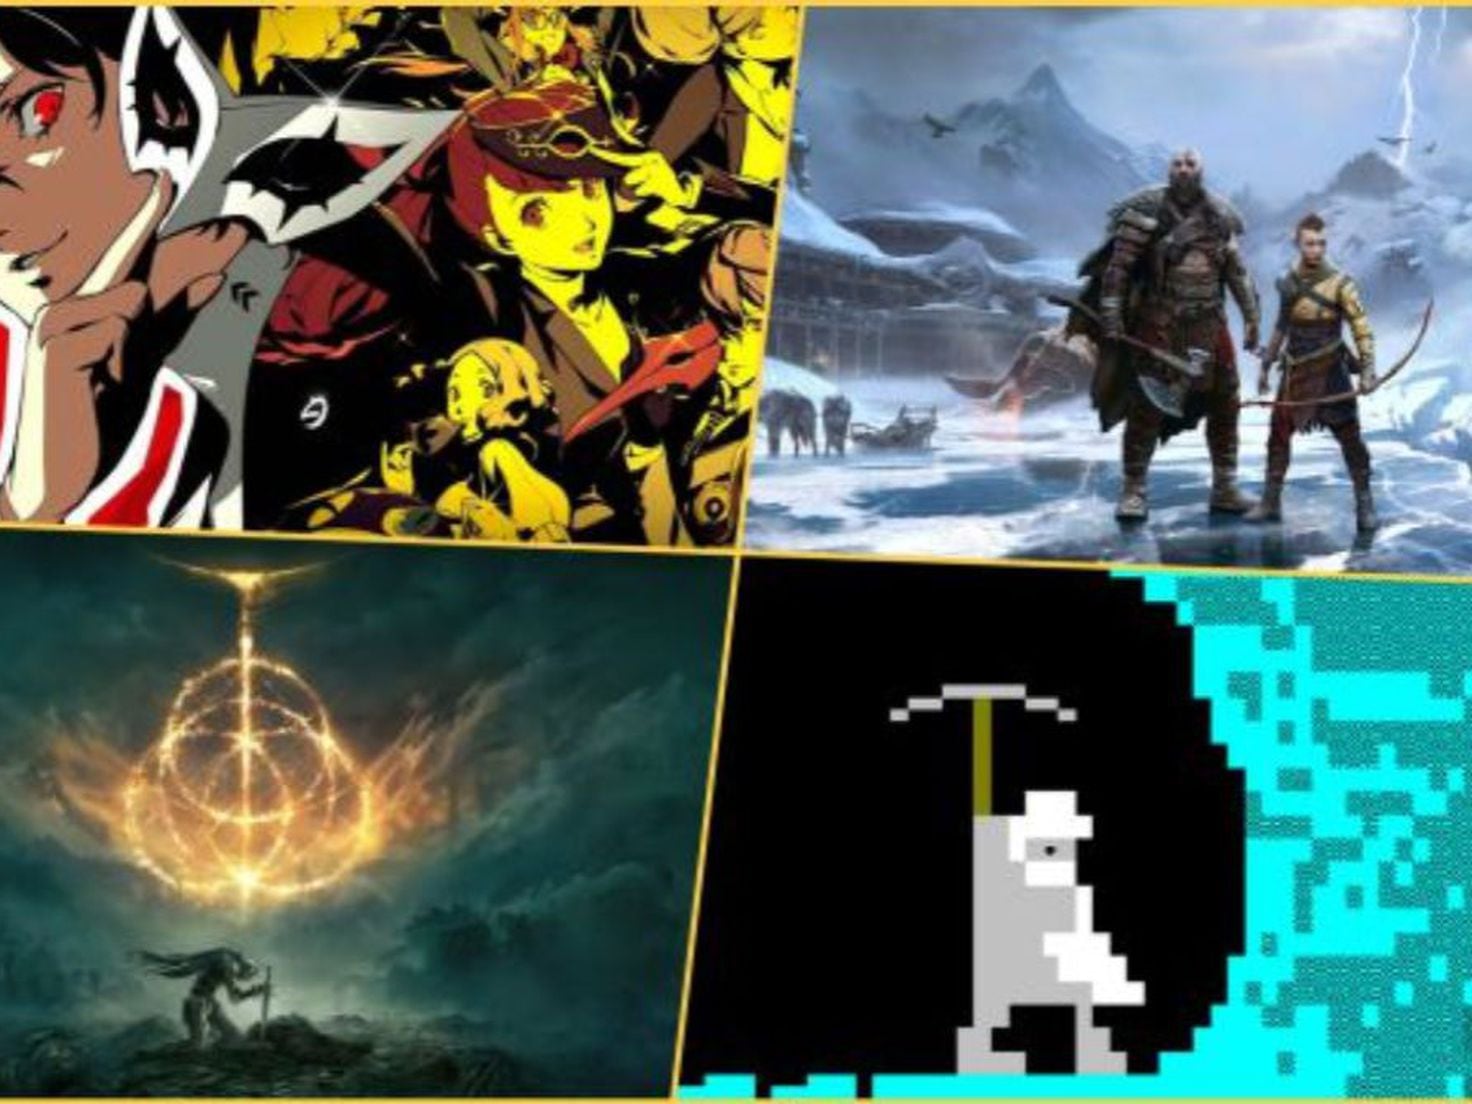 The Best RPGs Of 2022 According To Metacritic - GameSpot